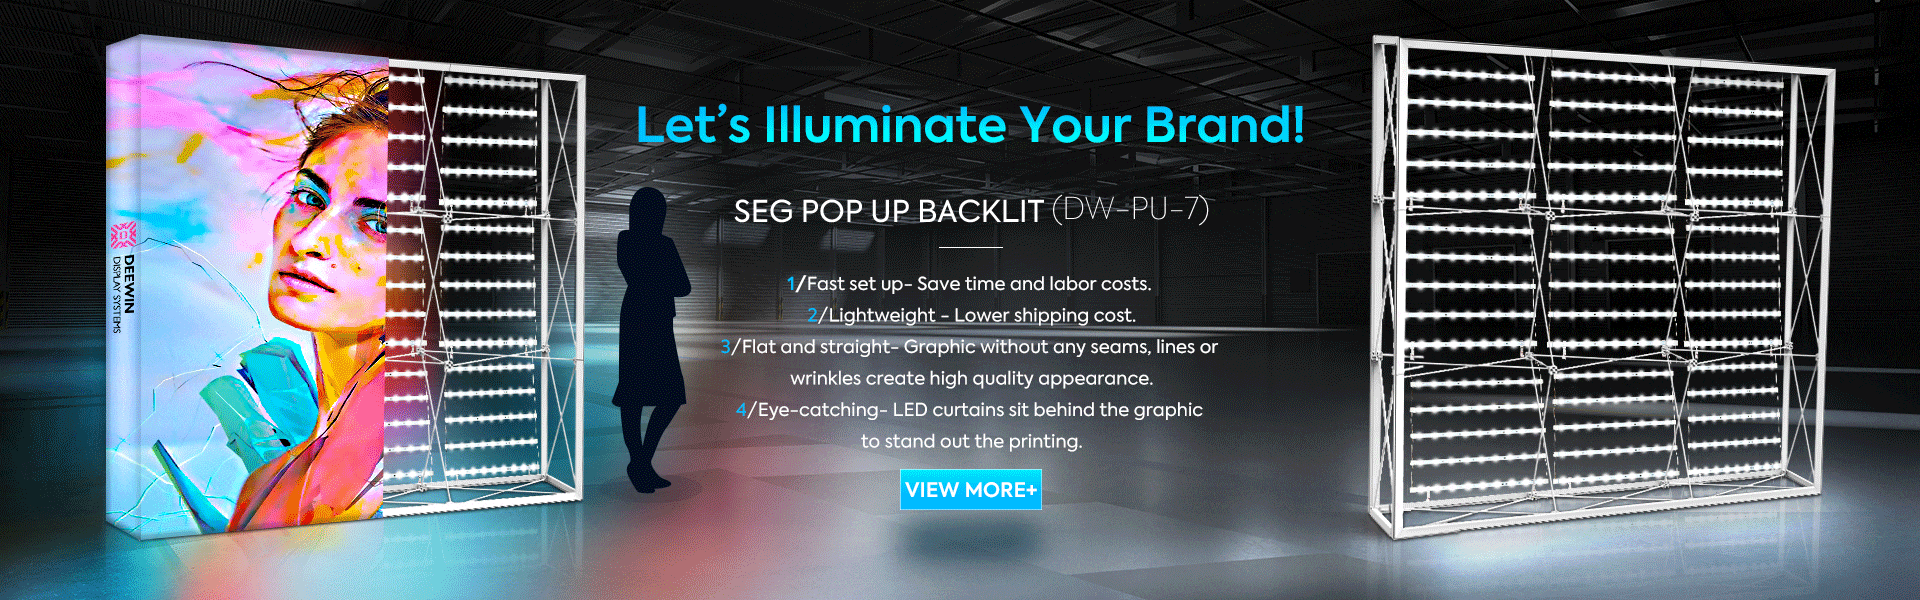 Let's llluminate Your Brand!